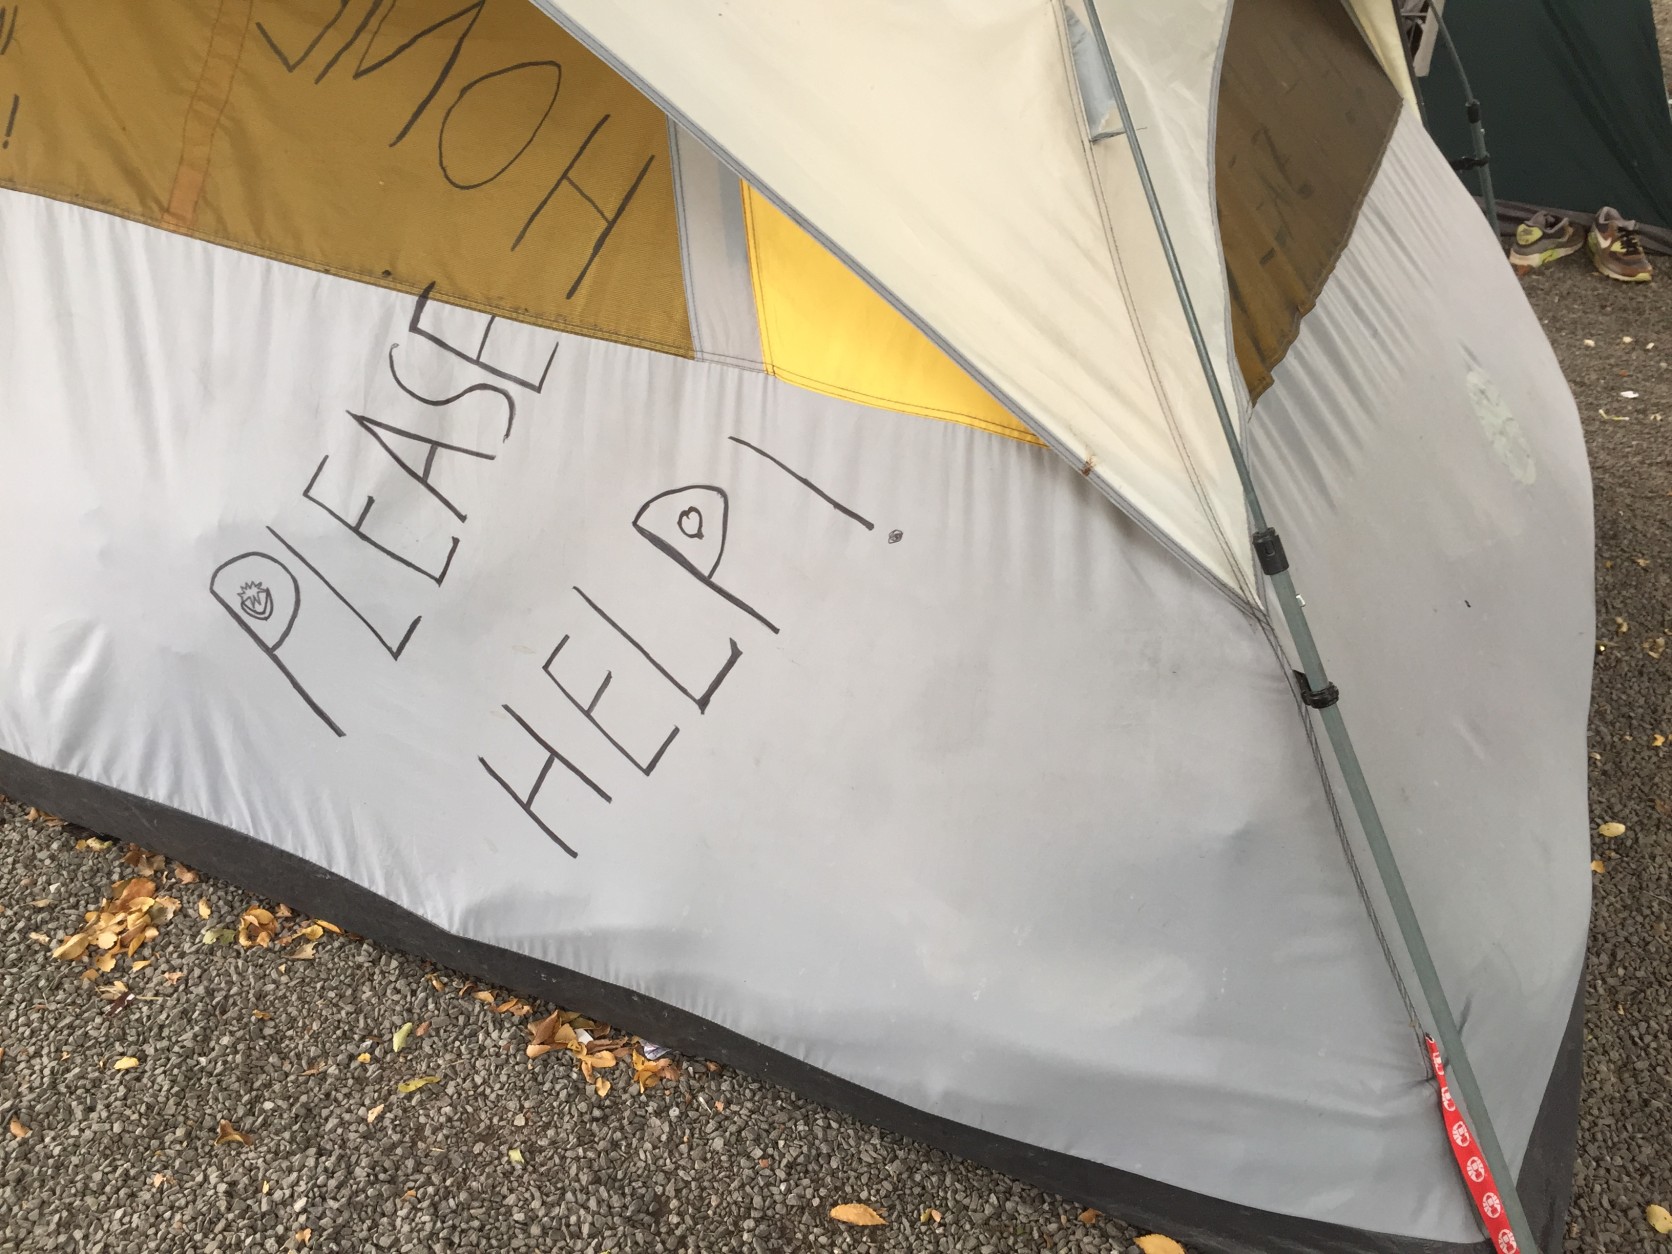 On Monday afternoon, 14 tents, some with multiple rooms, dotted the grassy area just north of the Watergate.

It's unclear how many recently became homeless. All said the tents -- which appear new -- were donated. (WTOP/Andrew Mollenbeck)